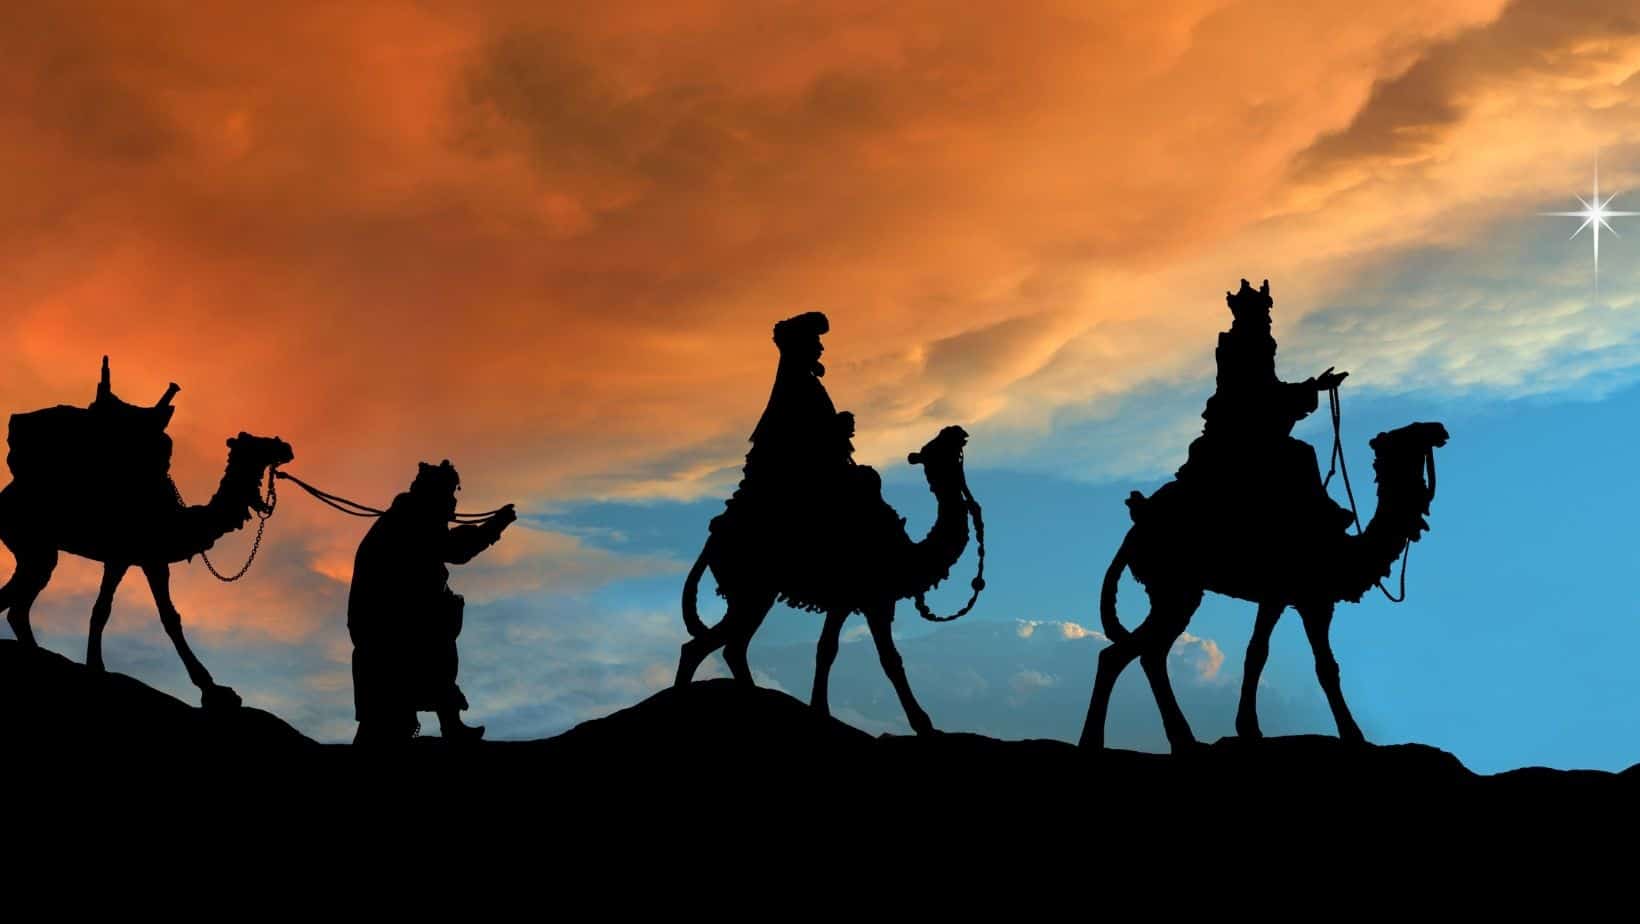 Three Kings Day Celebrating Epiphany with Children To Make a Family